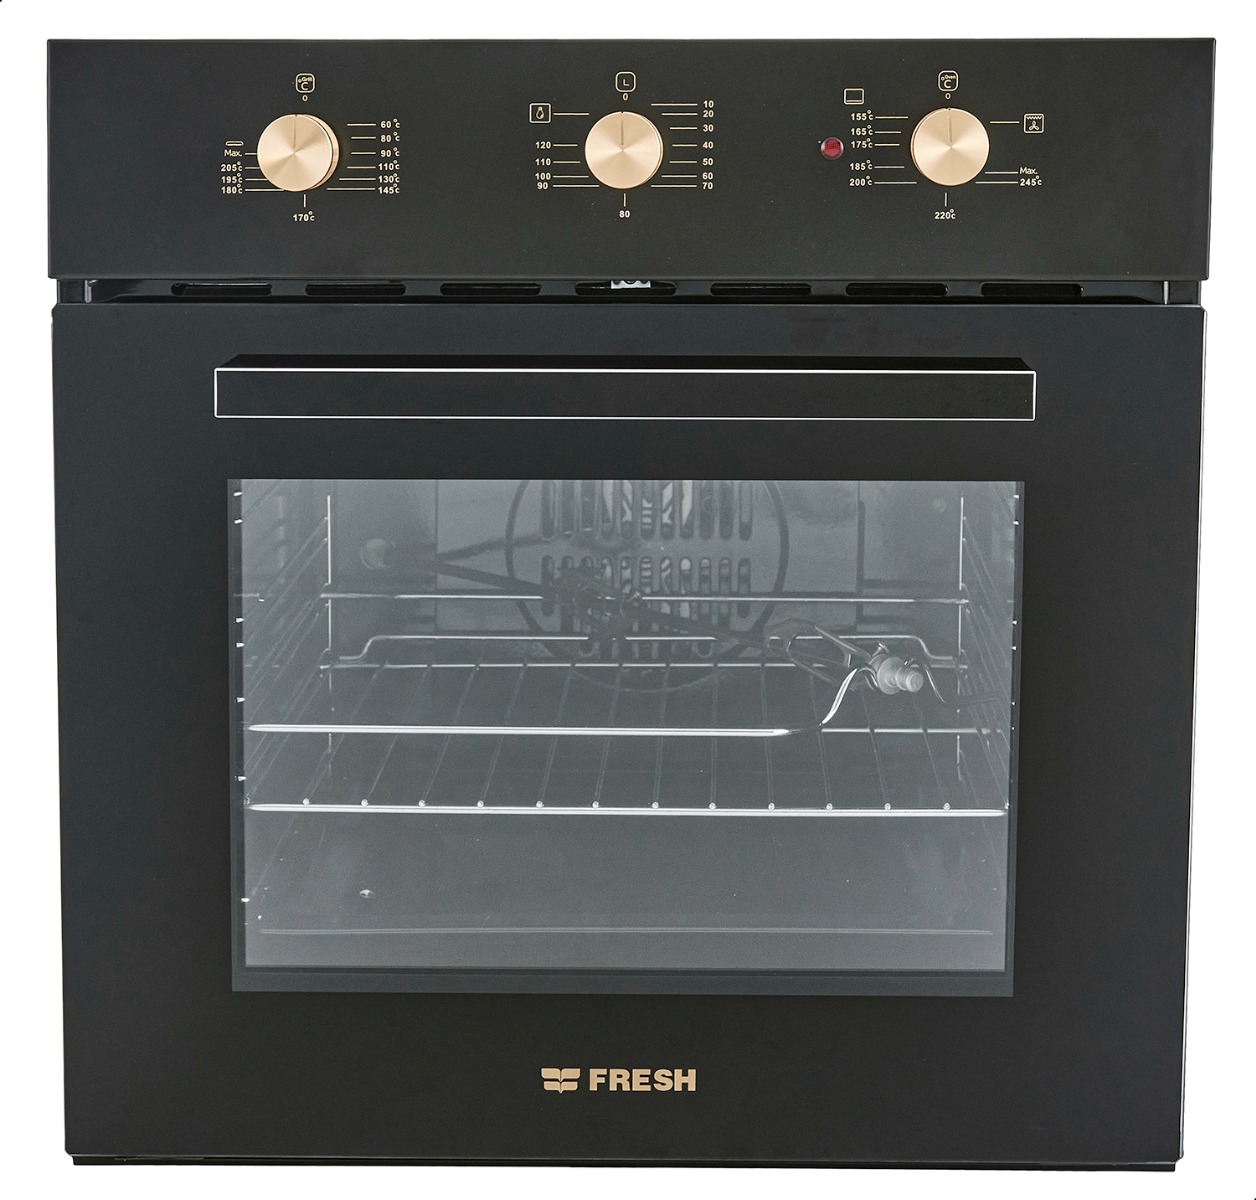 Fresh Built-In Dual Oven With Grill, 56 Liters, Black - 9636